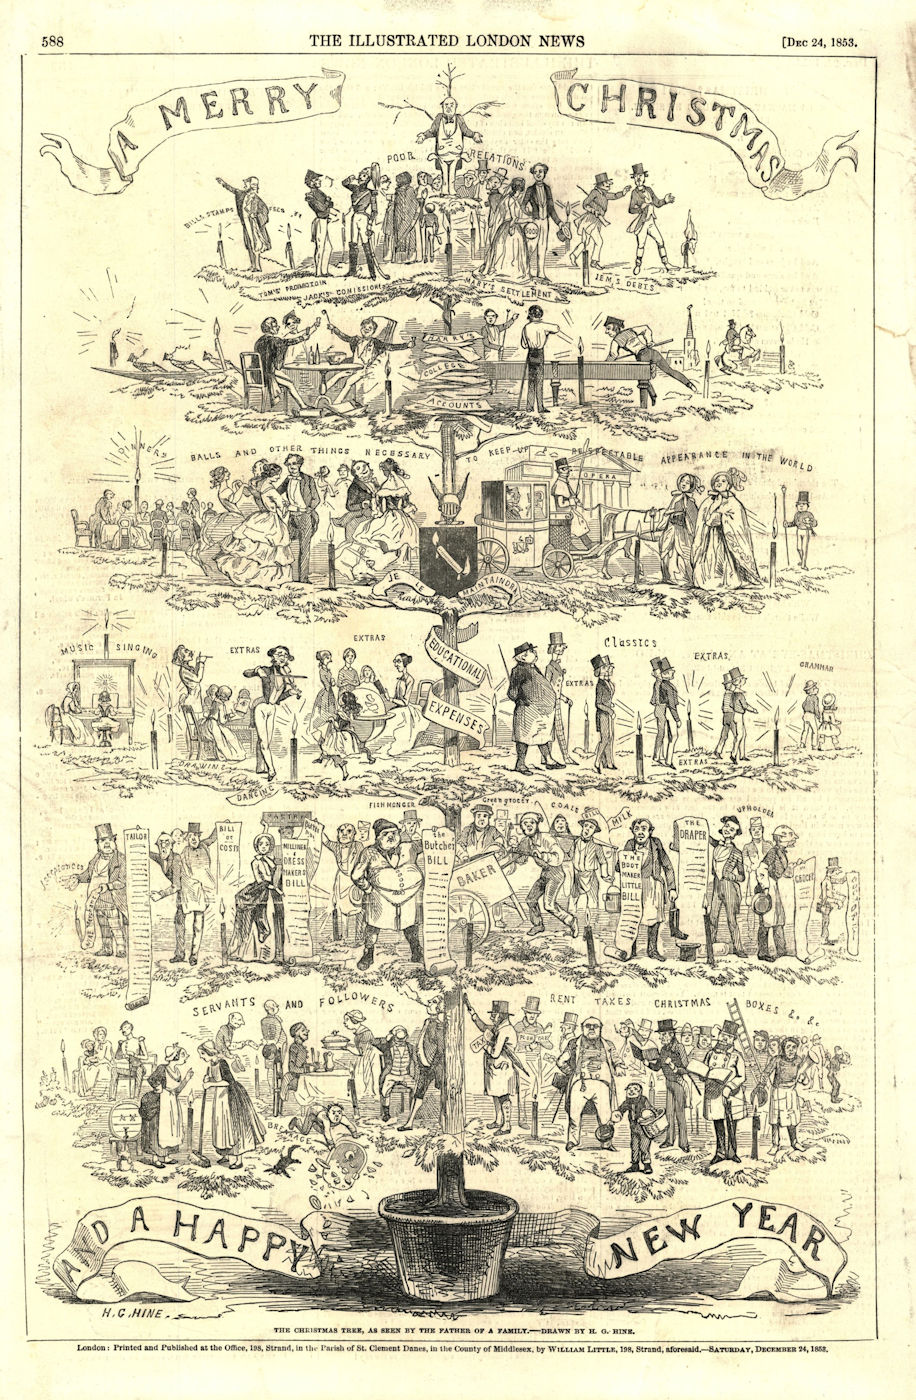 Associate Product The Christmas tree, as seen by the father of the family. Merry Christmas 1853